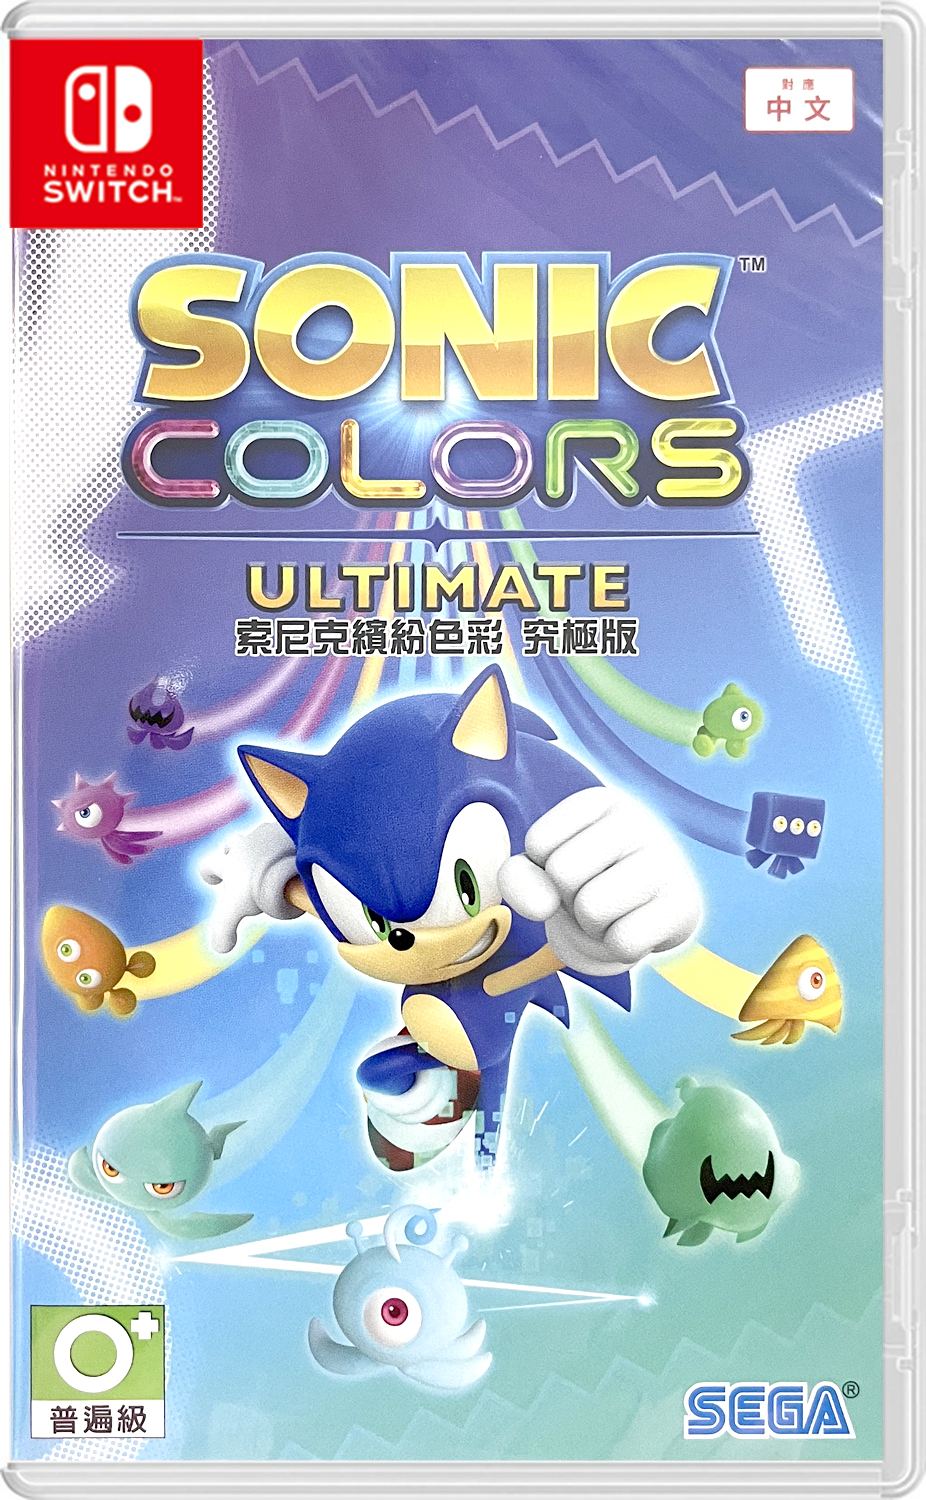 Sonic Colors: Ultimate - Gameplay Video - Nintendo Switch 